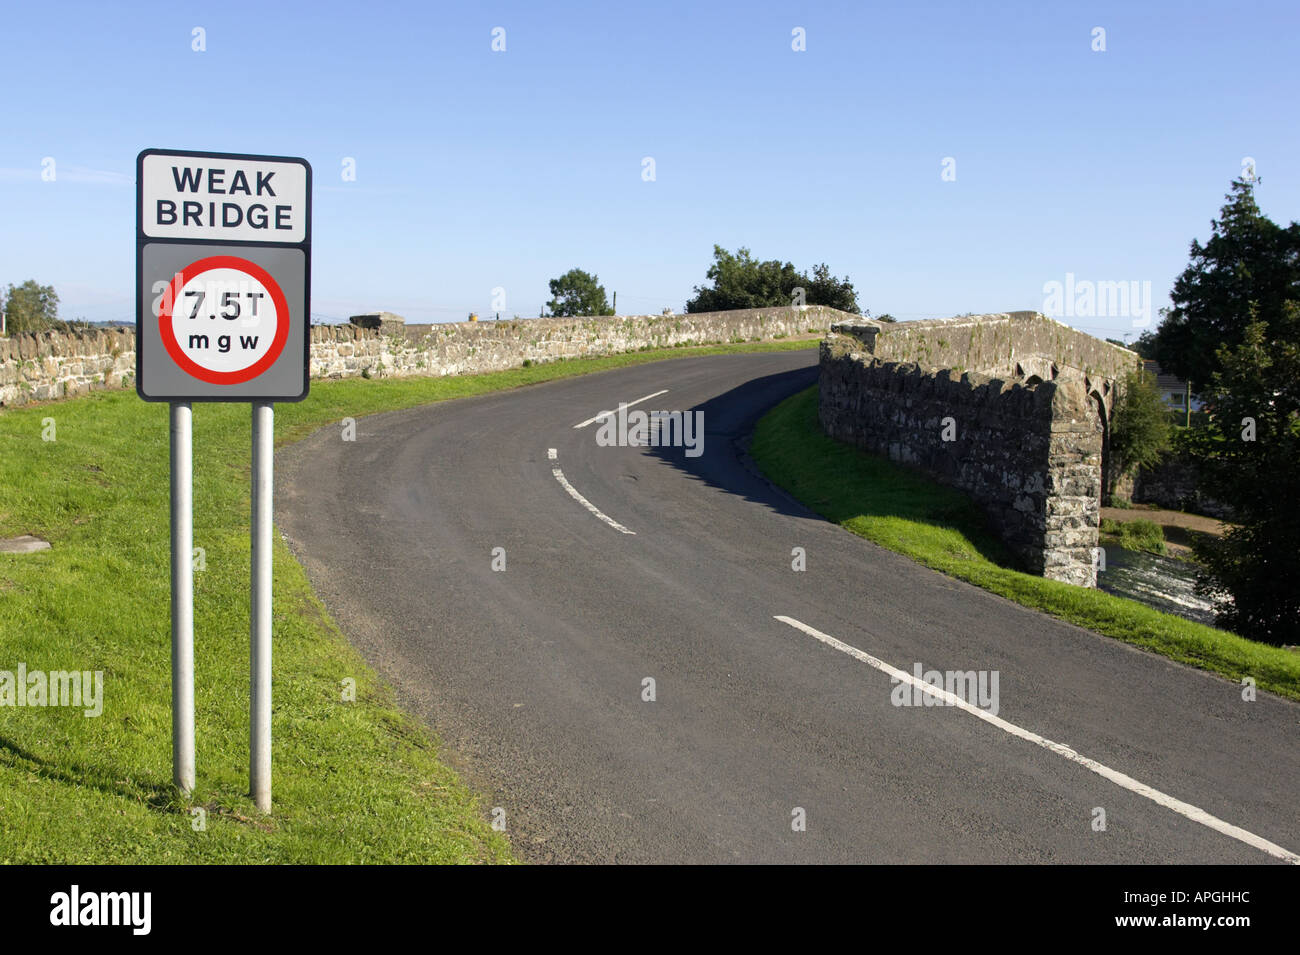 weak bridge 7 5 tonnes mgw weight restriction road sign and road leading over old stone bridge Stock Photo